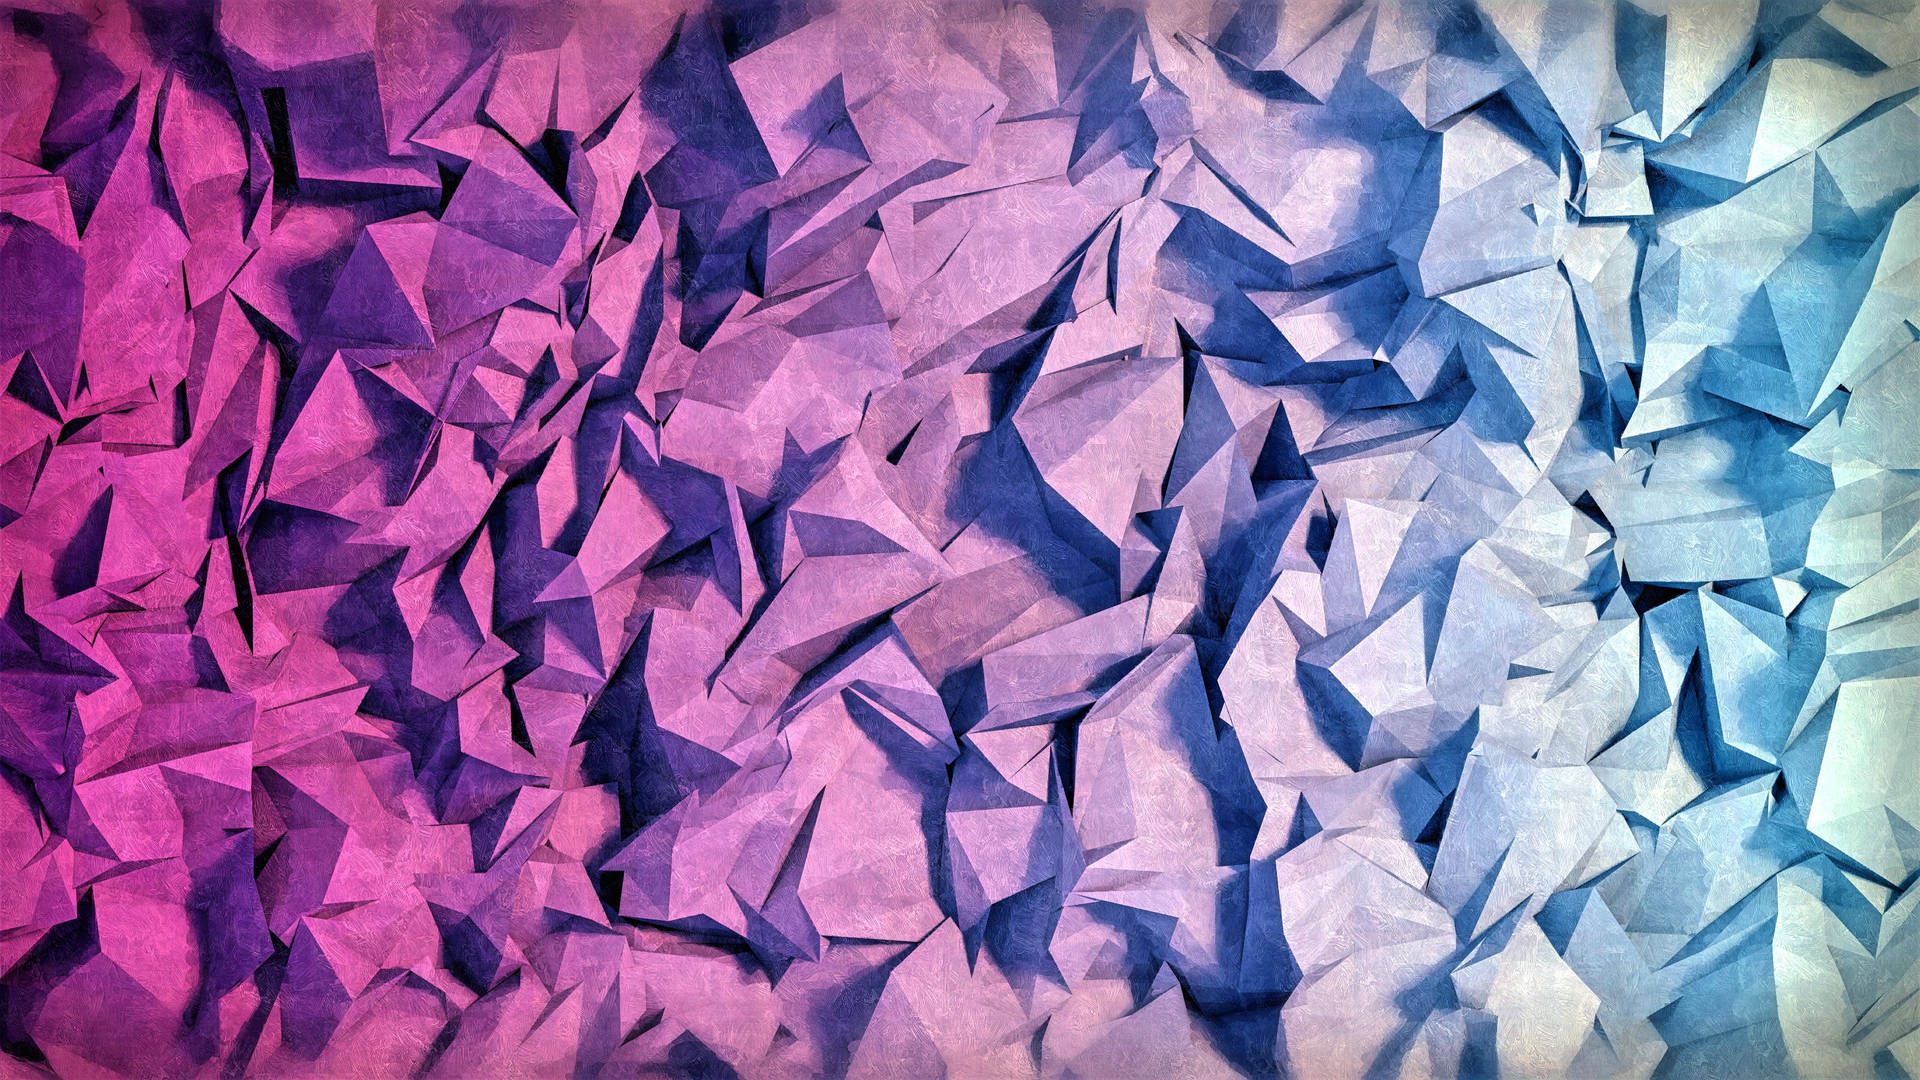 A wallpaper image of a pink and blue gradient with a geometric pattern - Low poly